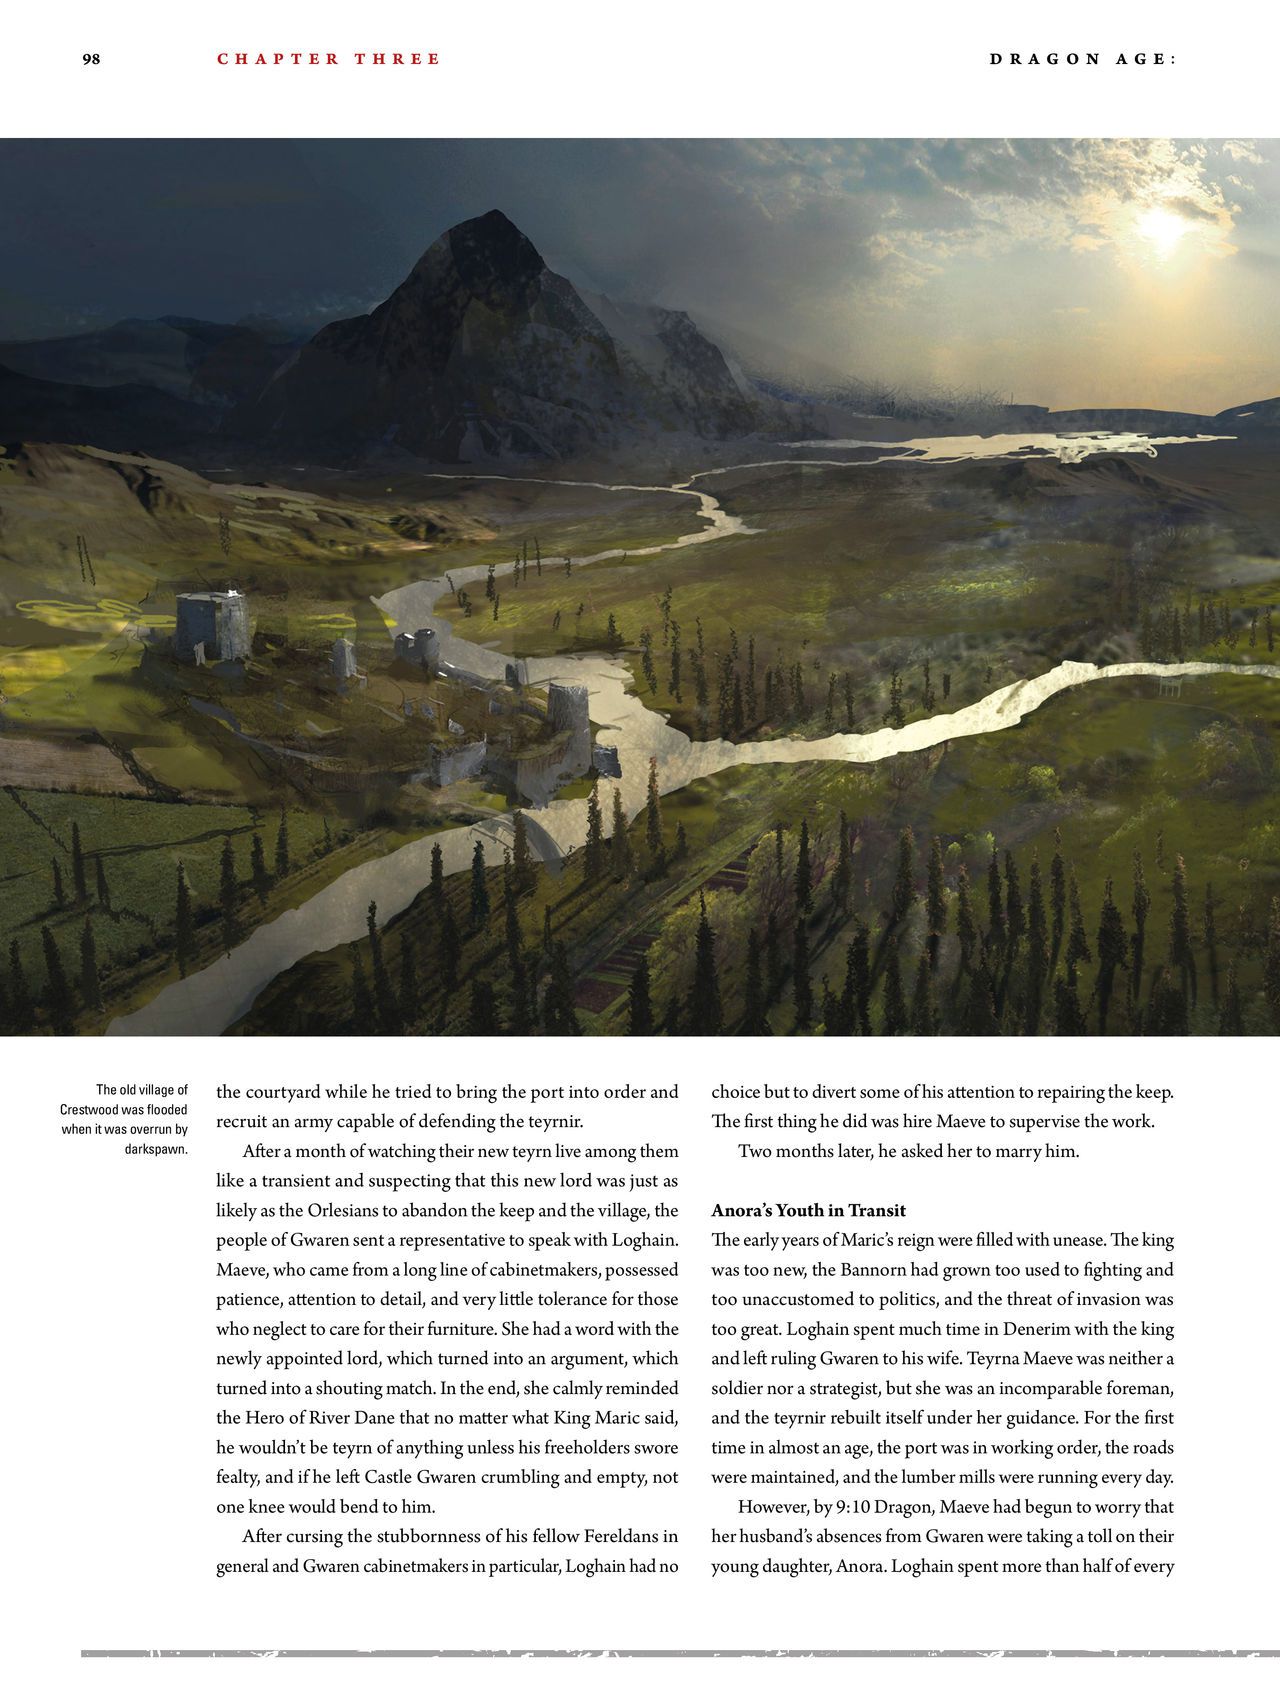 Dragon Age - The World of Thedas v02 94